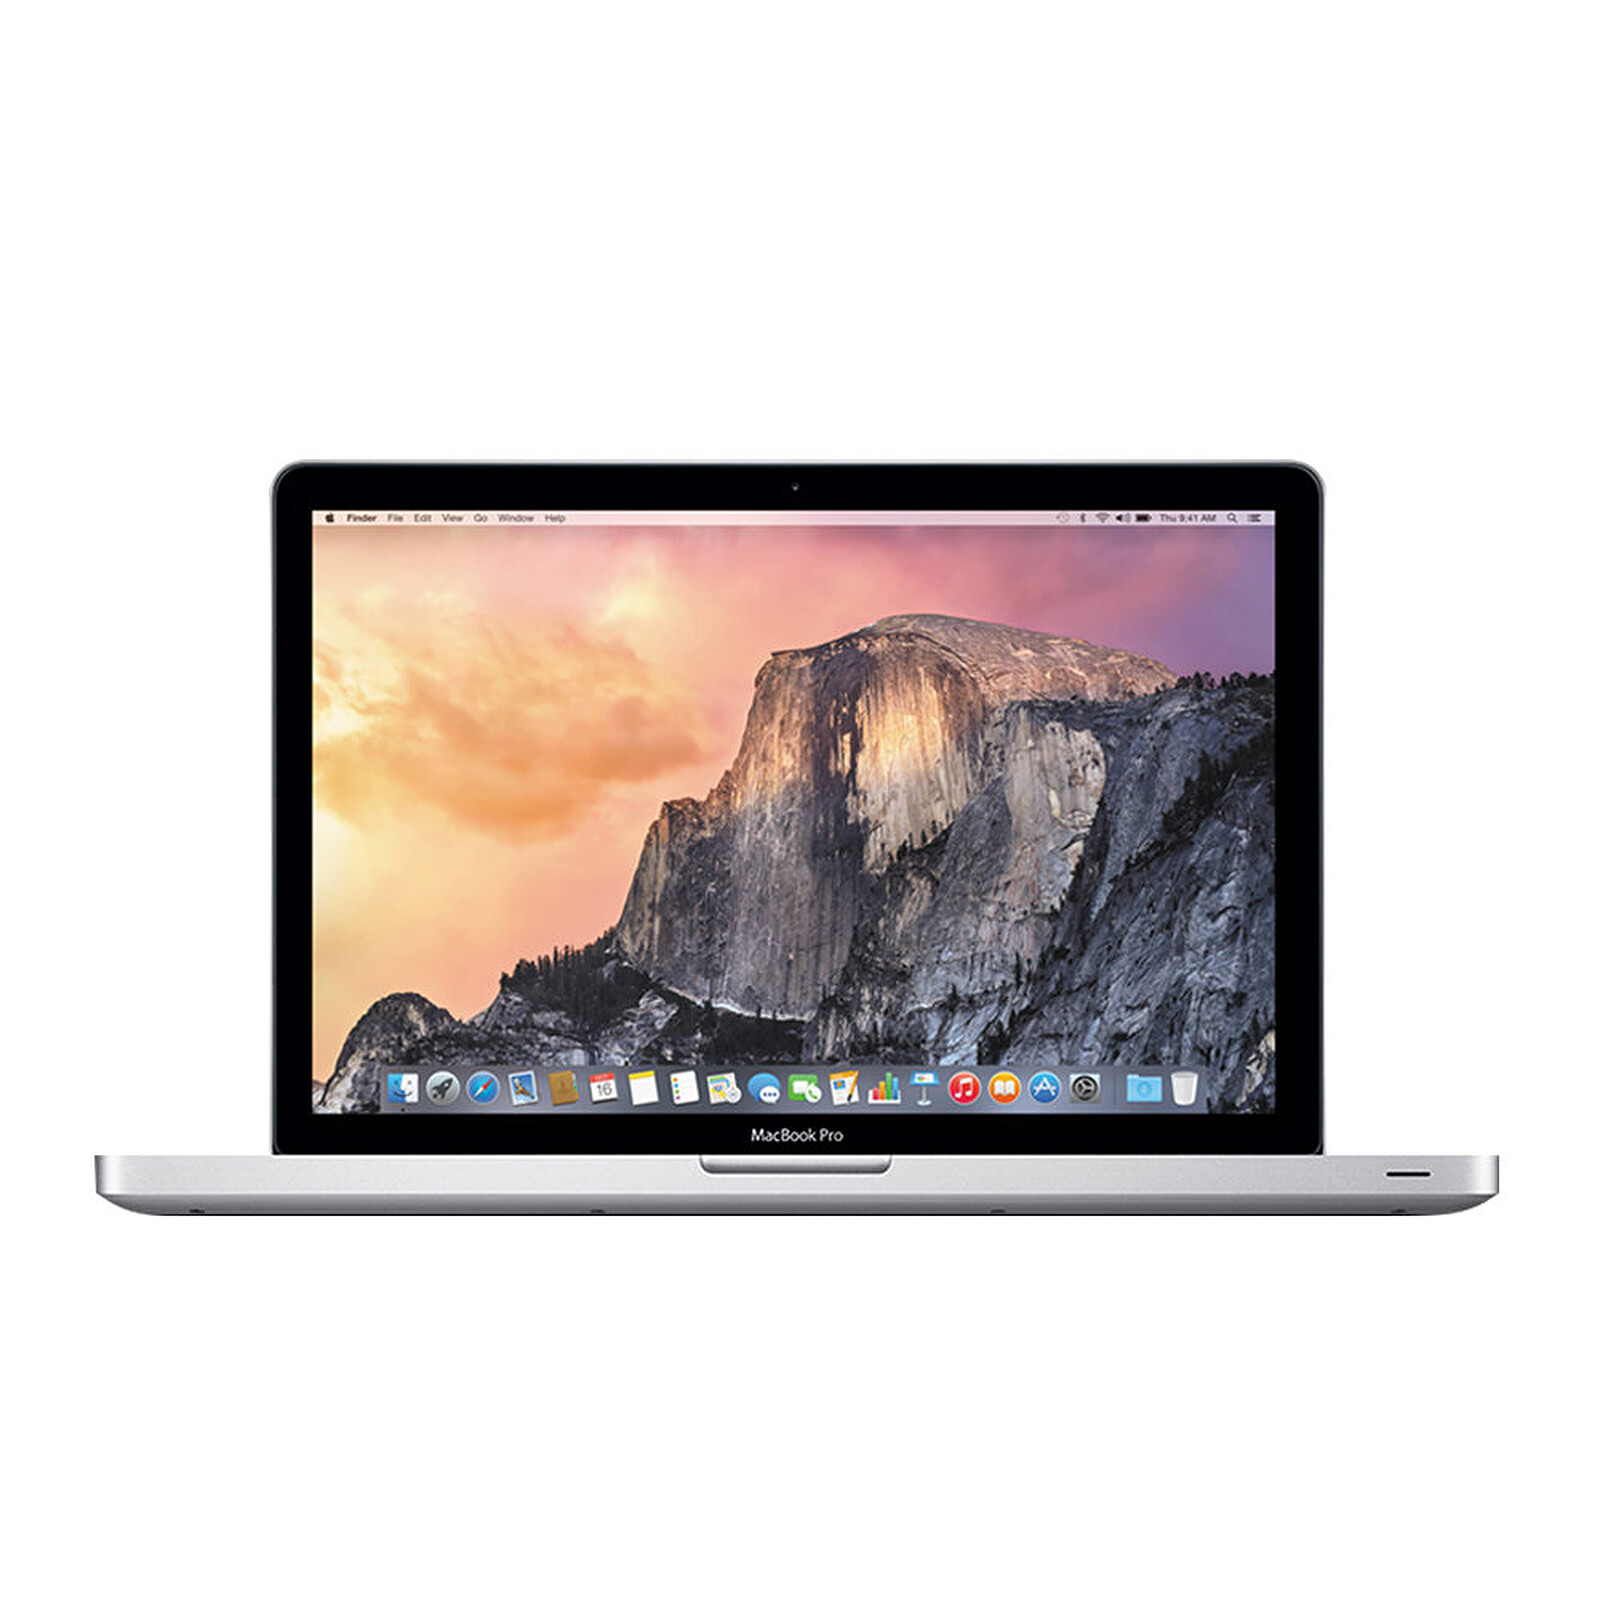 Apple MacBook Pro Touch Bar 16  - 2,4 Ghz - 16 Go - 512 Go SSD - Argent -  Intel UHD Graphics 630 and AMD Radeon Pro 5300M (2019) · Reconditionné - Macbook  reconditionné Apple sur